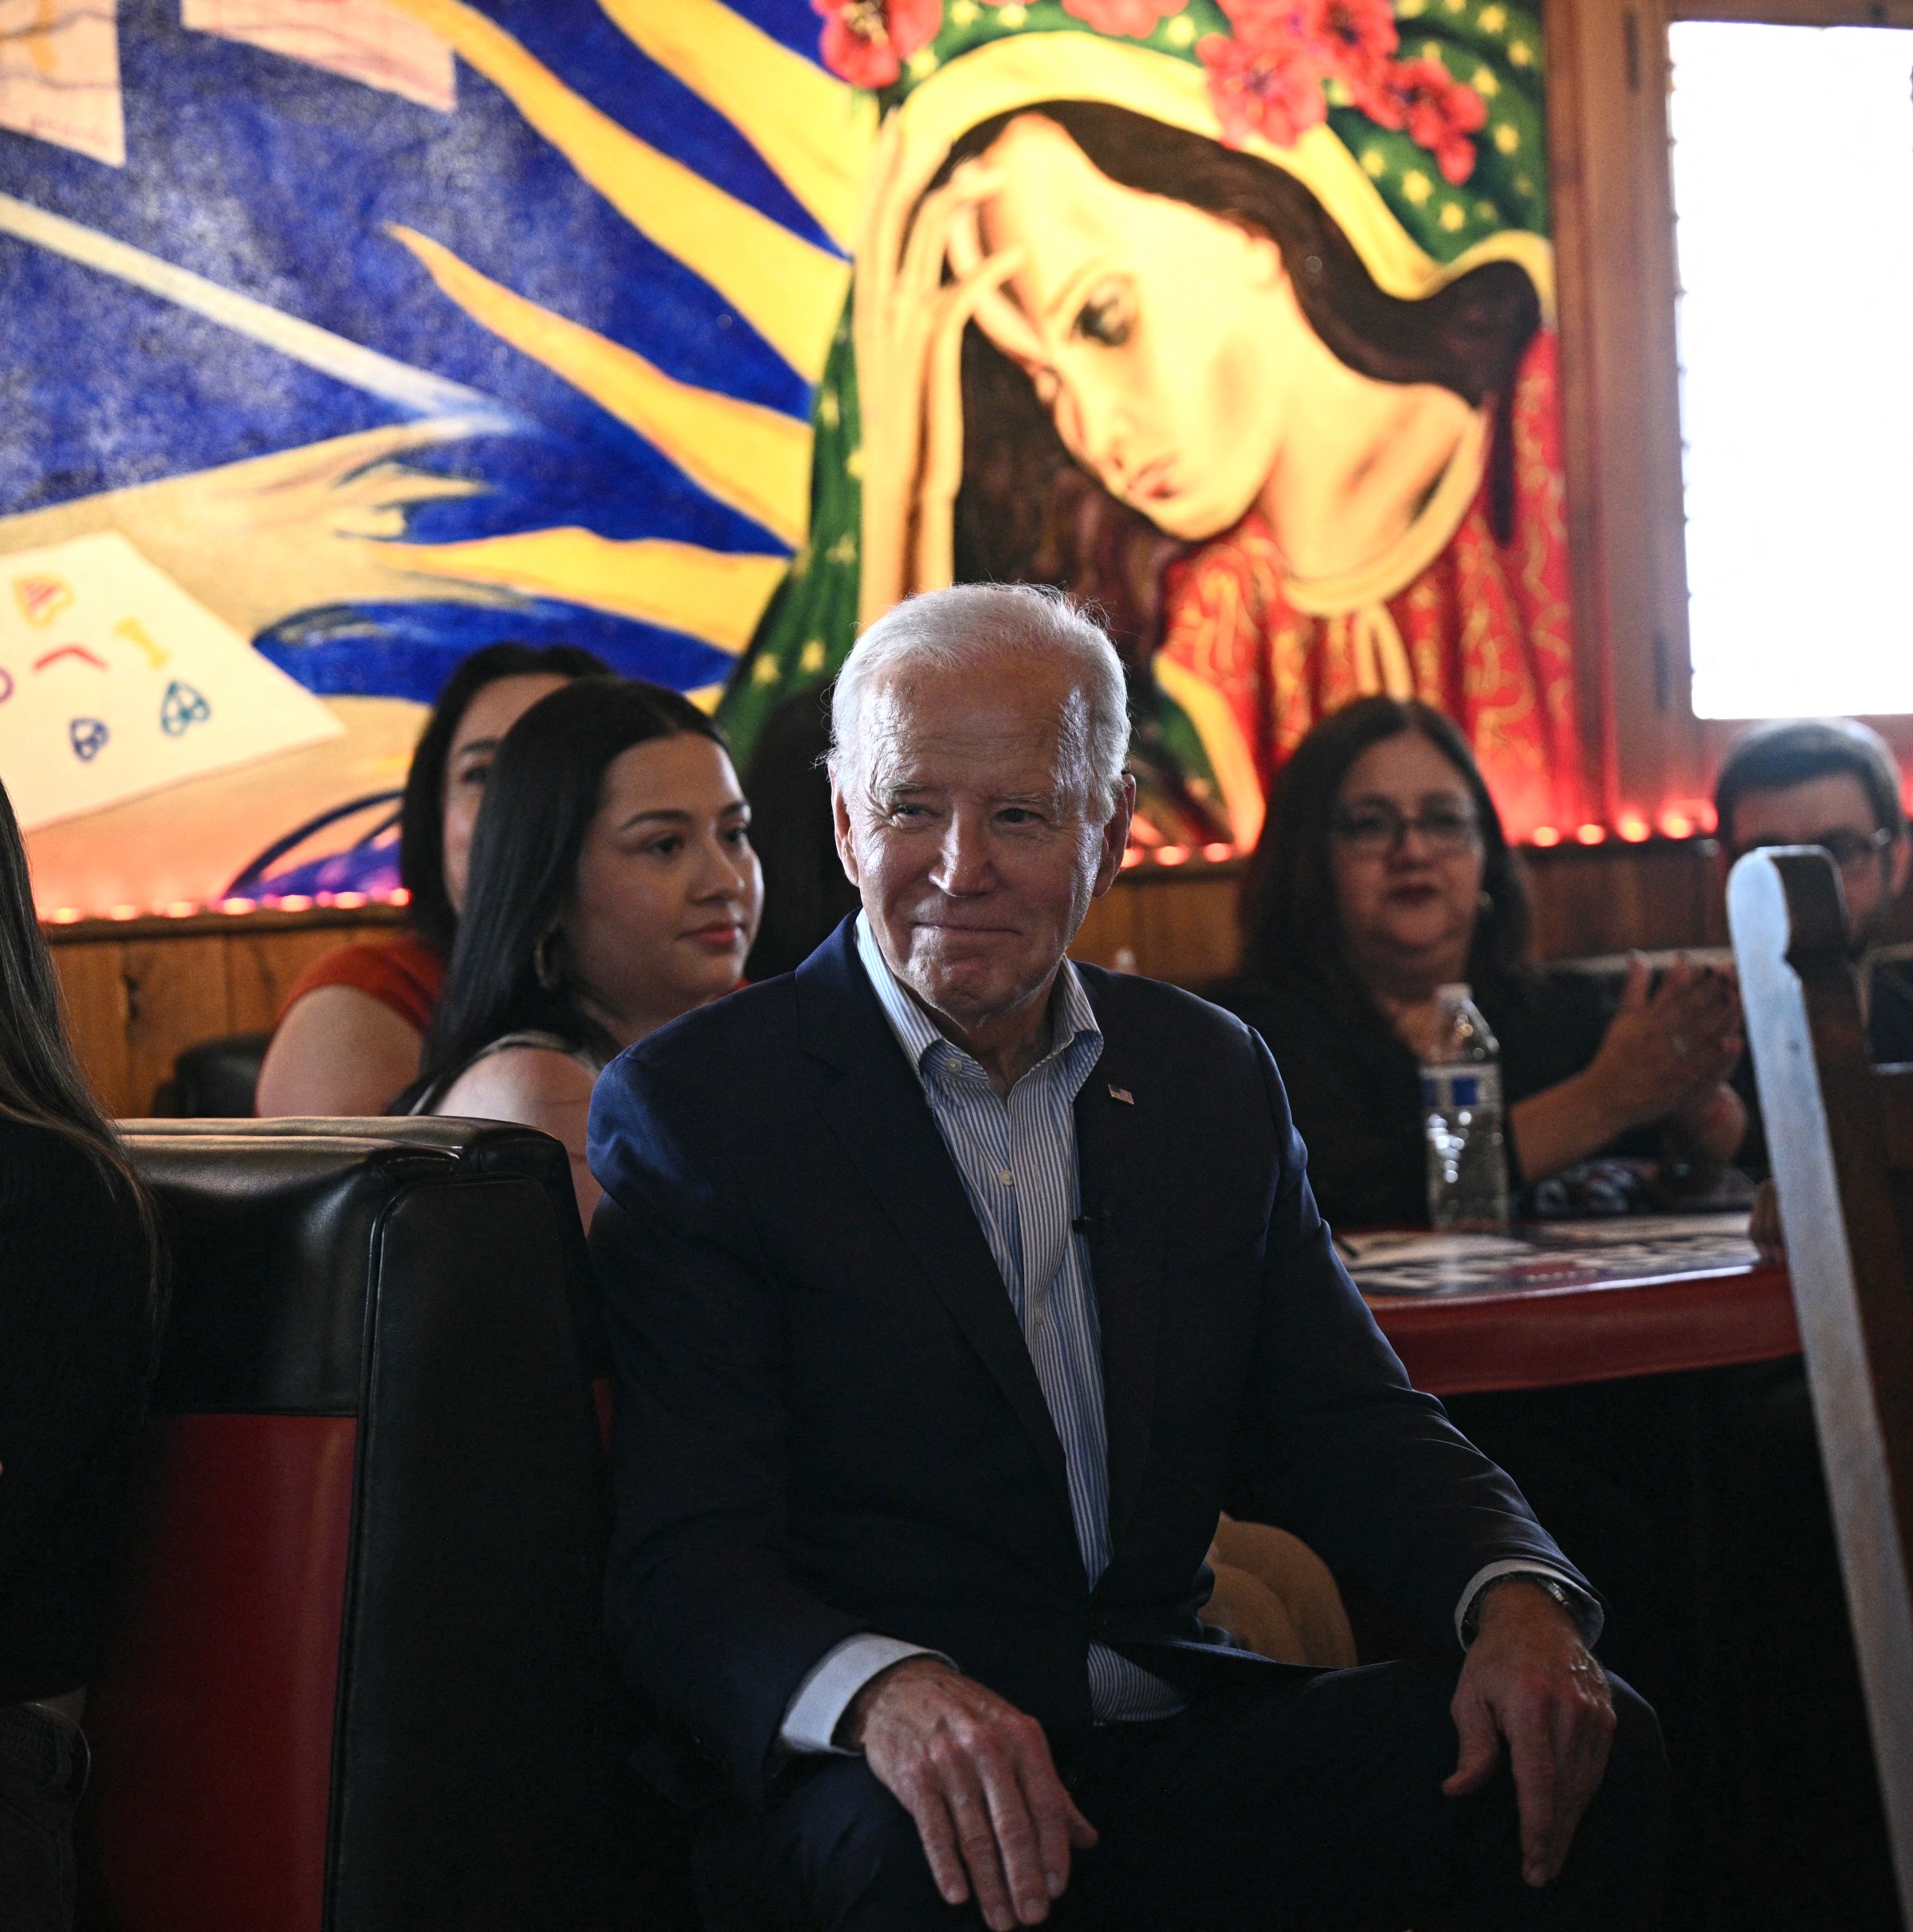 Biden is doing everything to reach Latinos. Trump is barely trying.